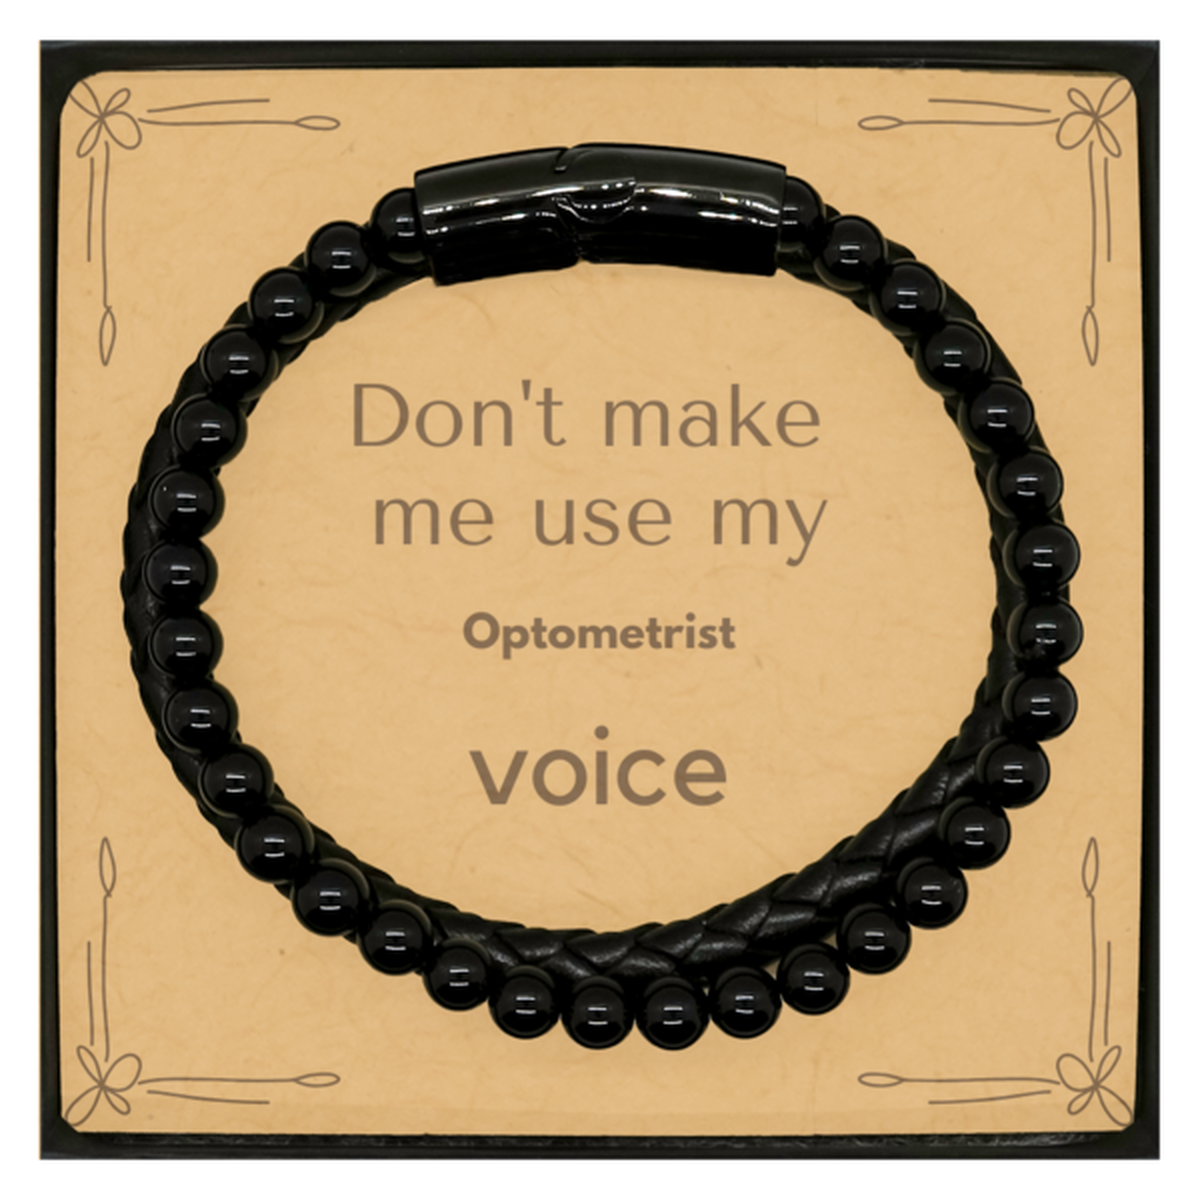 Don't make me use my Optometrist voice, Sarcasm Optometrist Card Gifts, Christmas Optometrist Stone Leather Bracelets Birthday Unique Gifts For Optometrist Coworkers, Men, Women, Colleague, Friends